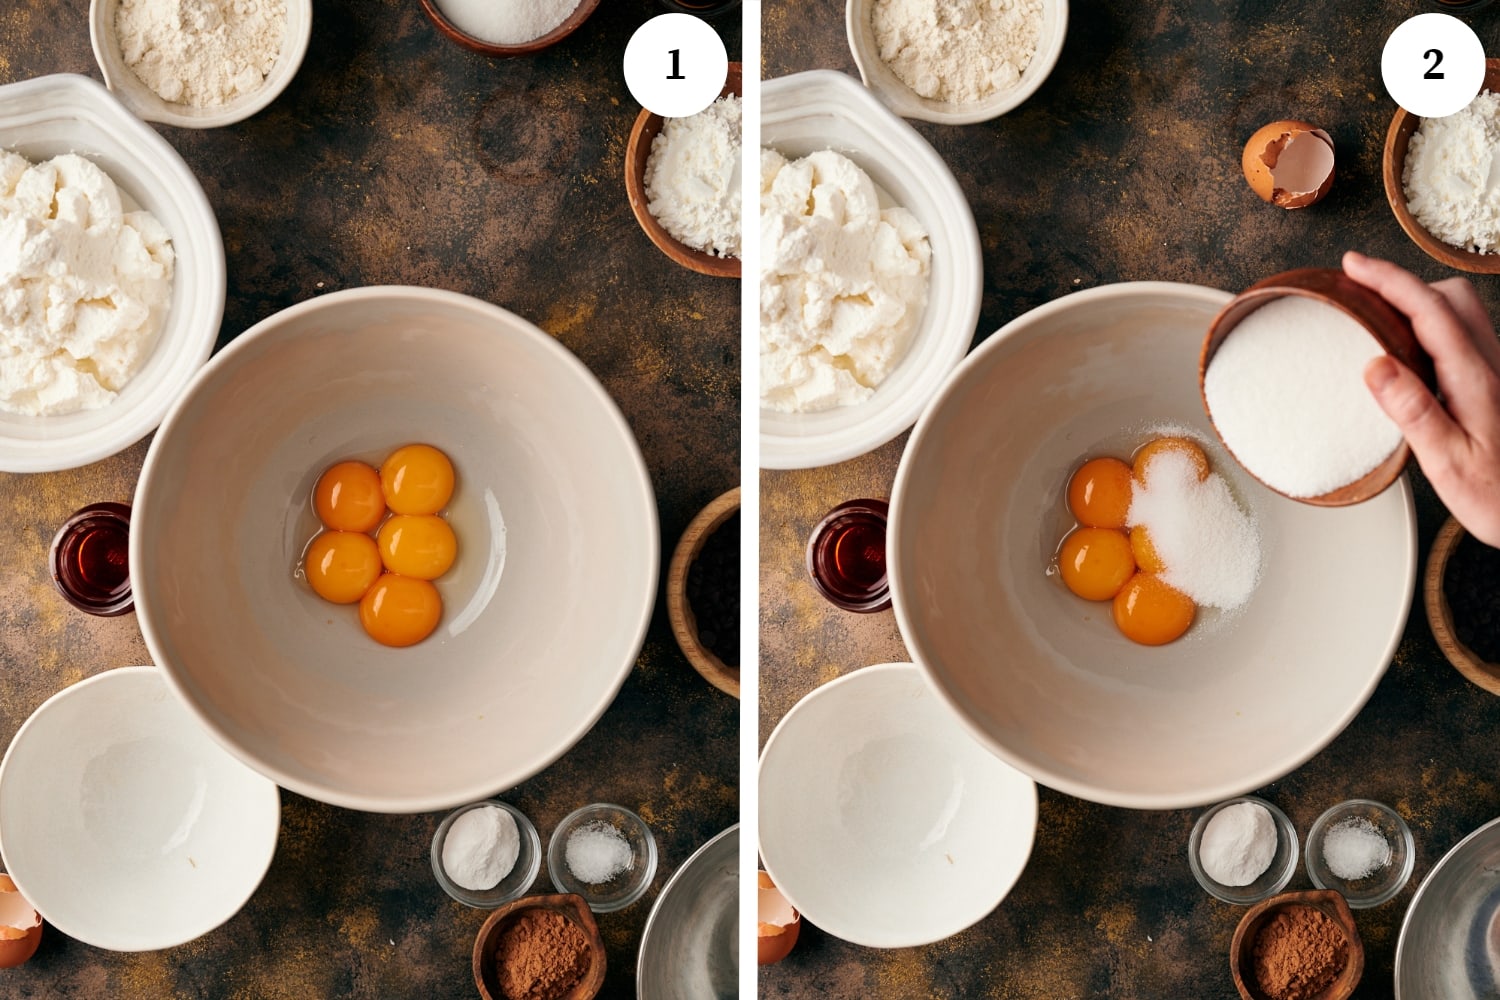 zuccotto procedure: first photo is a big white bowl with egg yolks. second photo is white bowl with egg yolks with a hand adding a bowl of sugar into the eggs